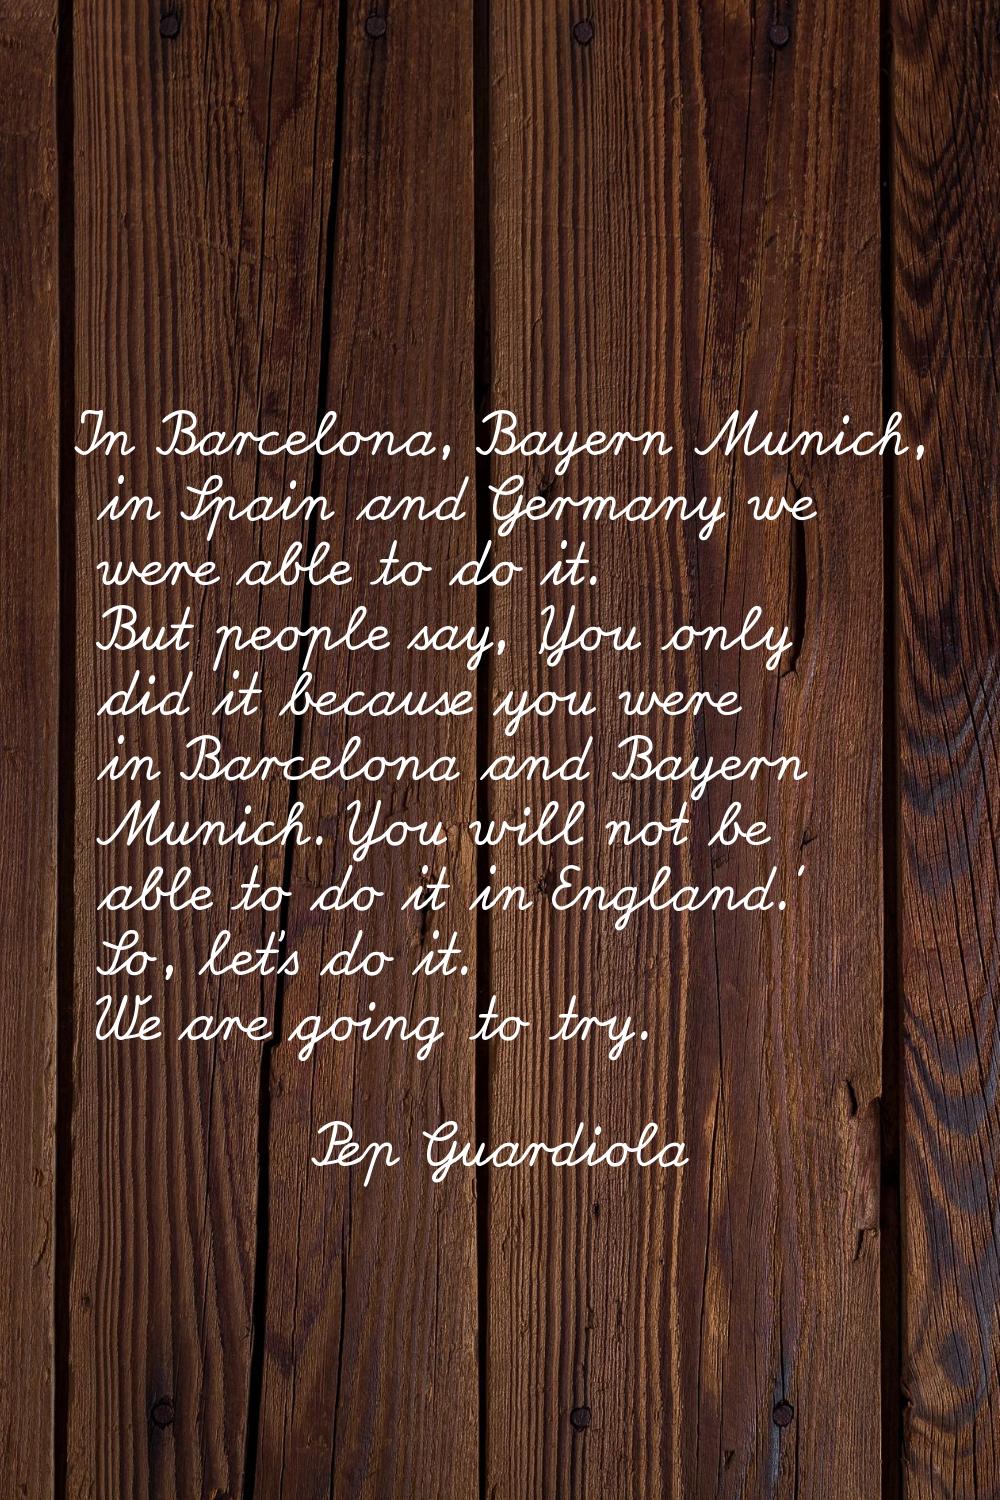 In Barcelona, Bayern Munich, in Spain and Germany we were able to do it. But people say, 'You only 